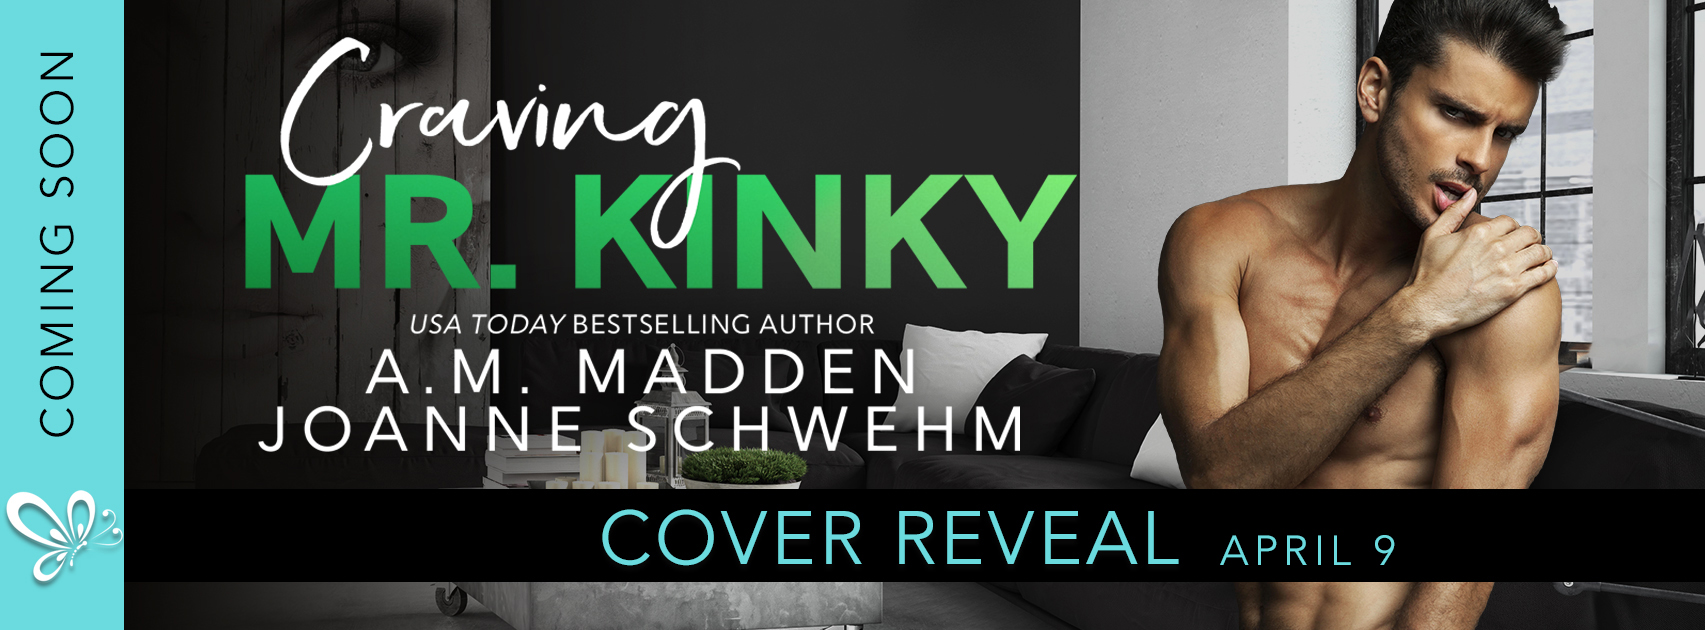 Craving Mr. Kinky by A.M. Madden & Joanne Schwehm Cover Reveal